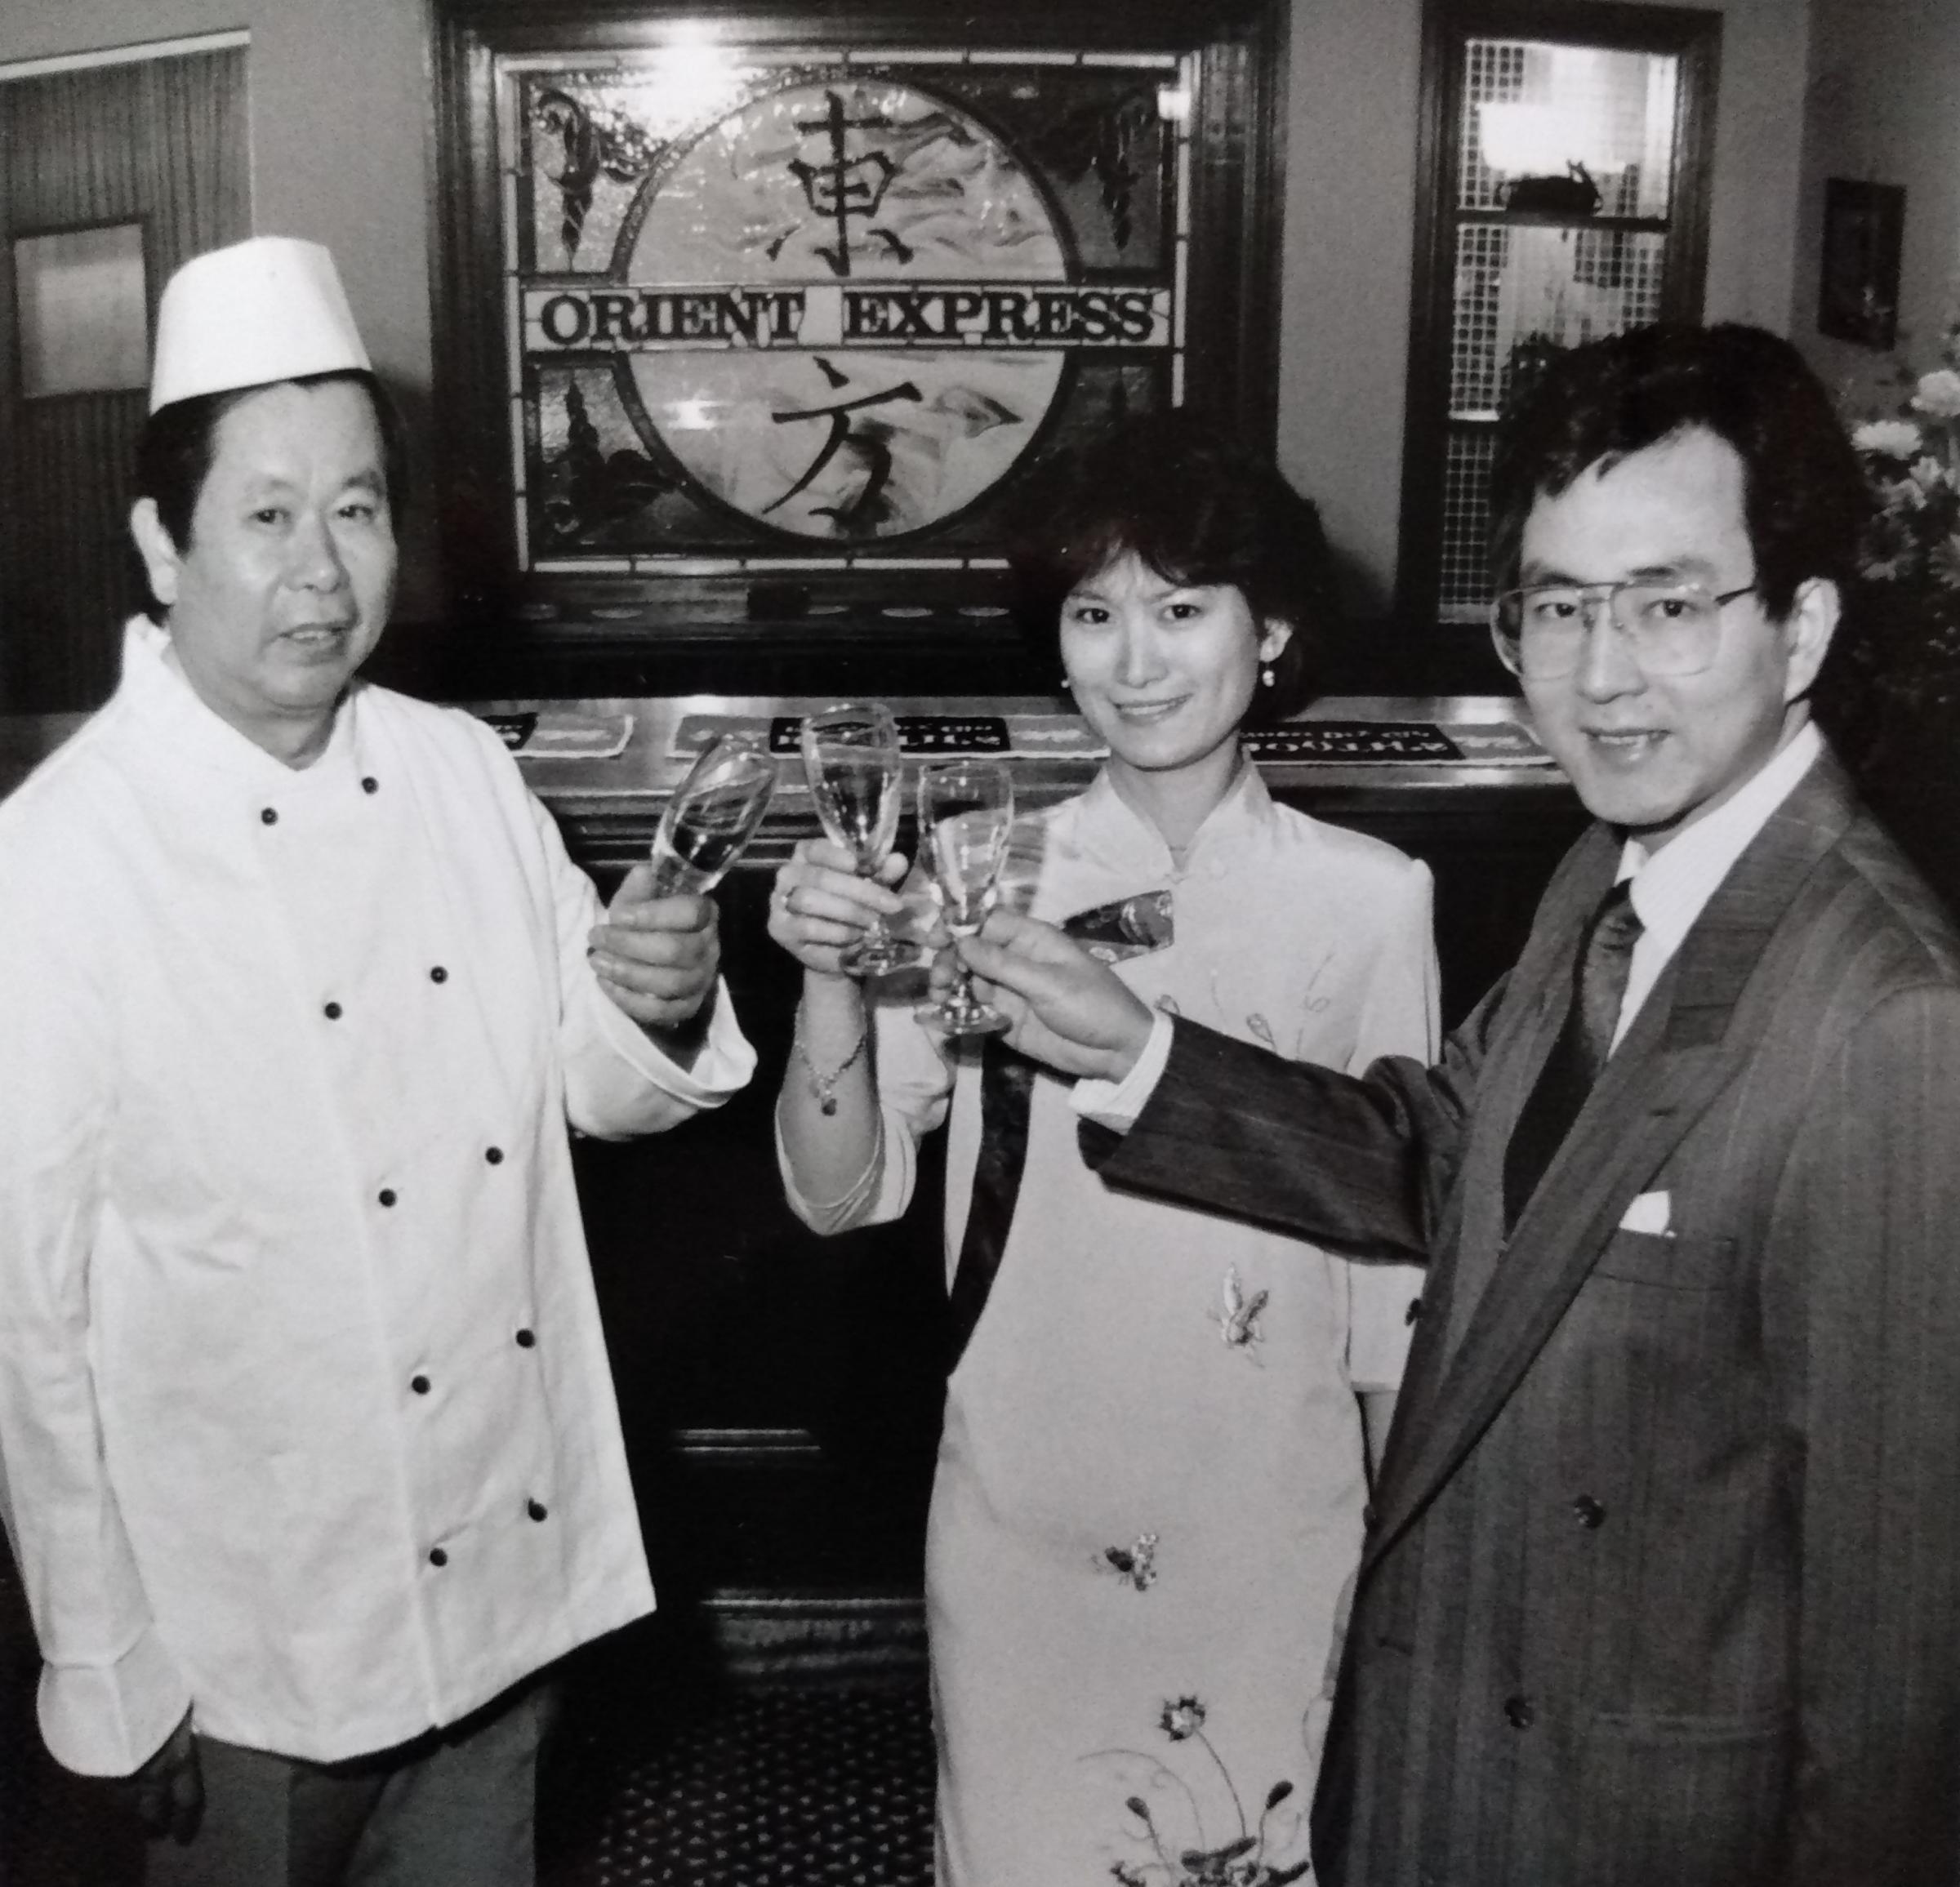 One of the popular Chinese takeaways in Worcester, The Orient Express, opened its doors for the first time in 1989, and it was a family affair, run by Frankie Tsang, while dad Keung Tsang was in charge of the kitchen